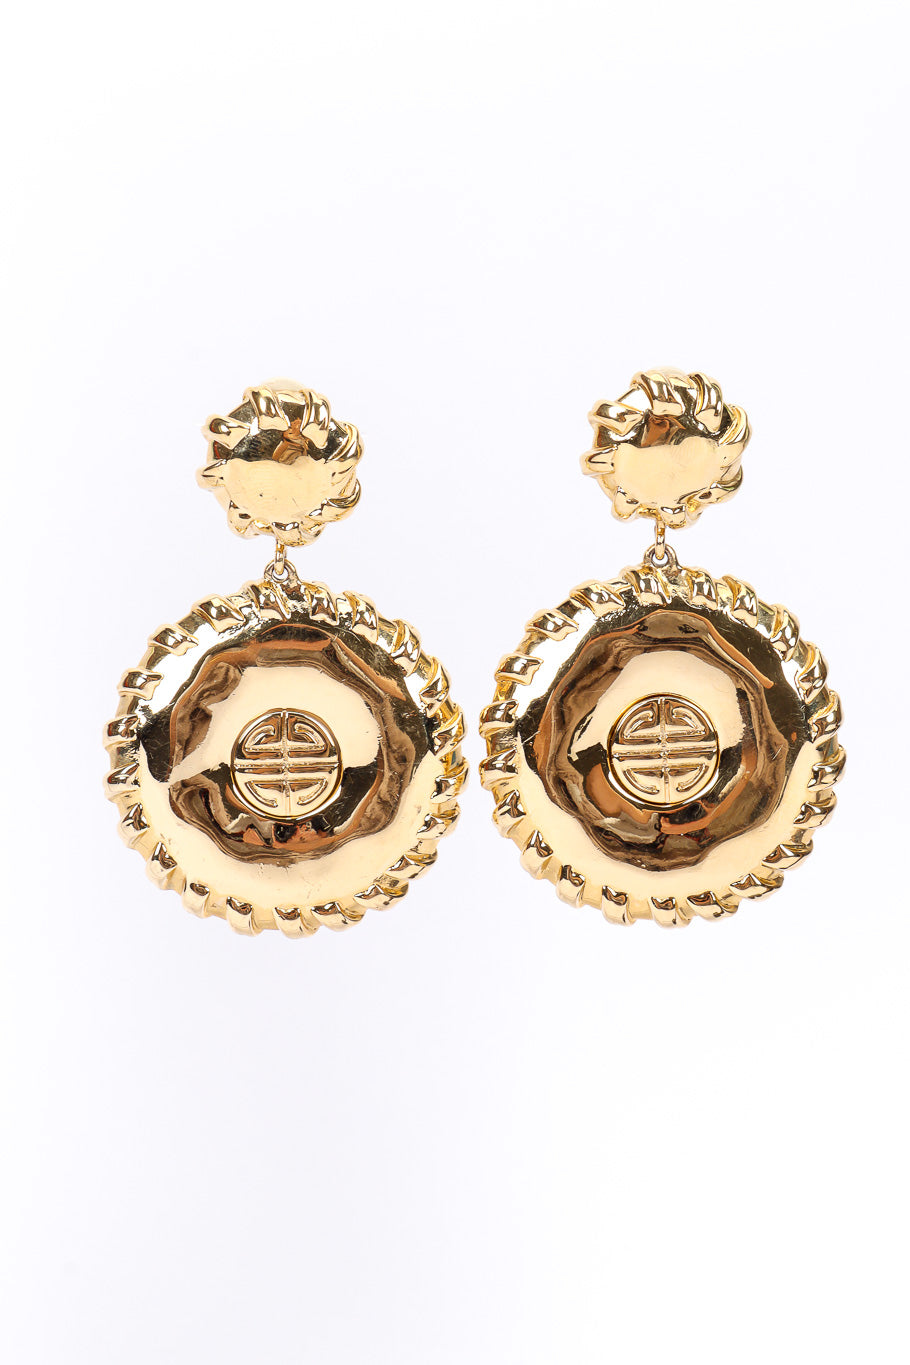 Medallion drop earrings by Givenchy on white background side by side @recessla